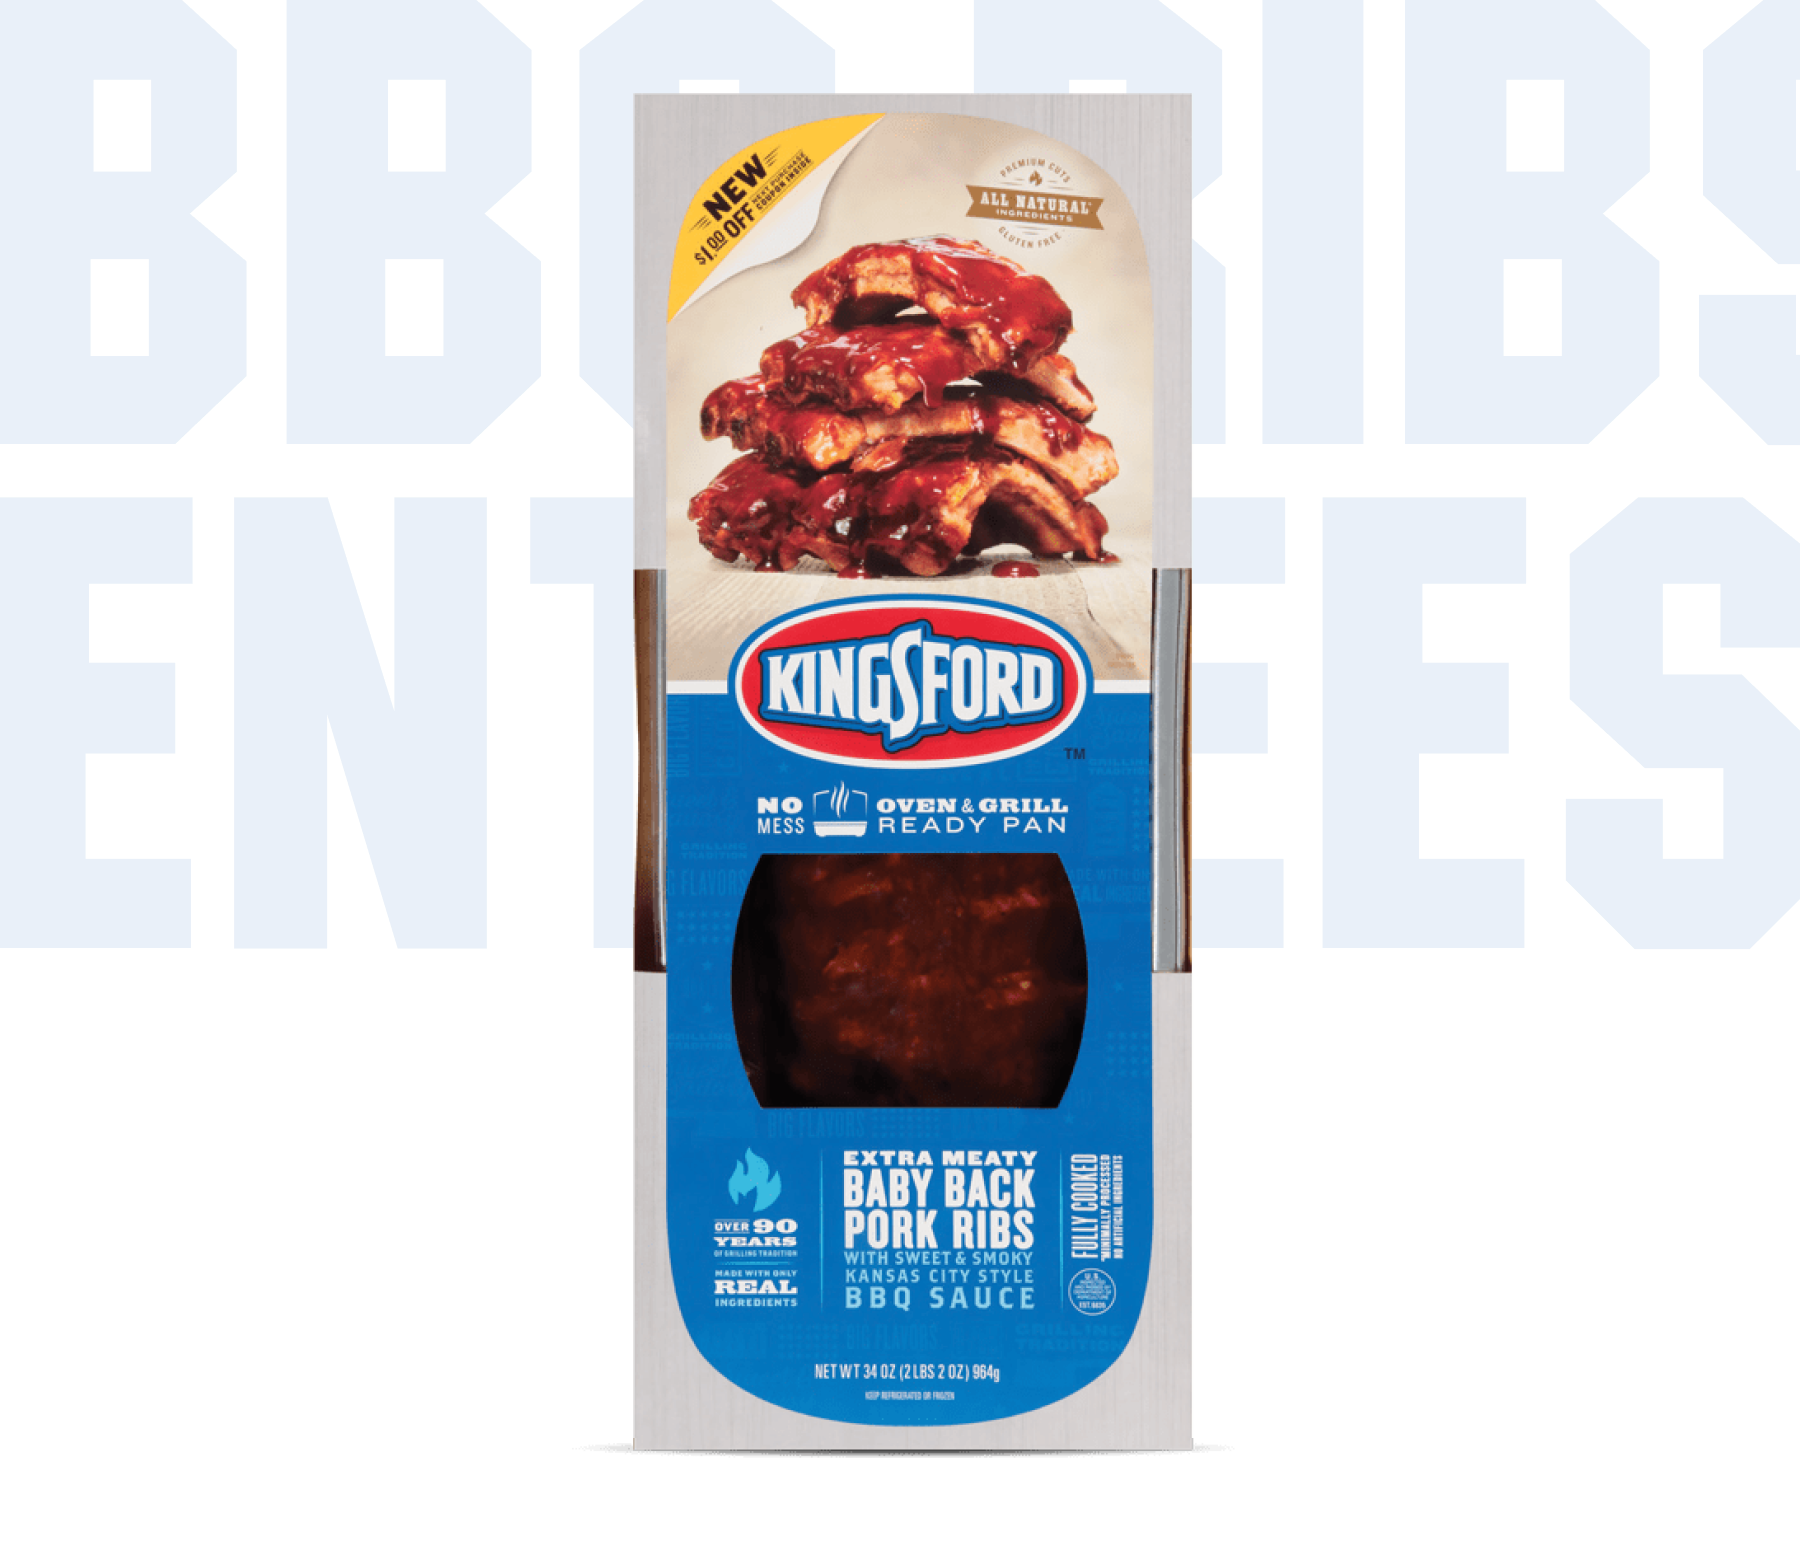 https://www.kingsford.com/wp-content/uploads/2019/07/food-bbq-entrees-900x772@2x.png